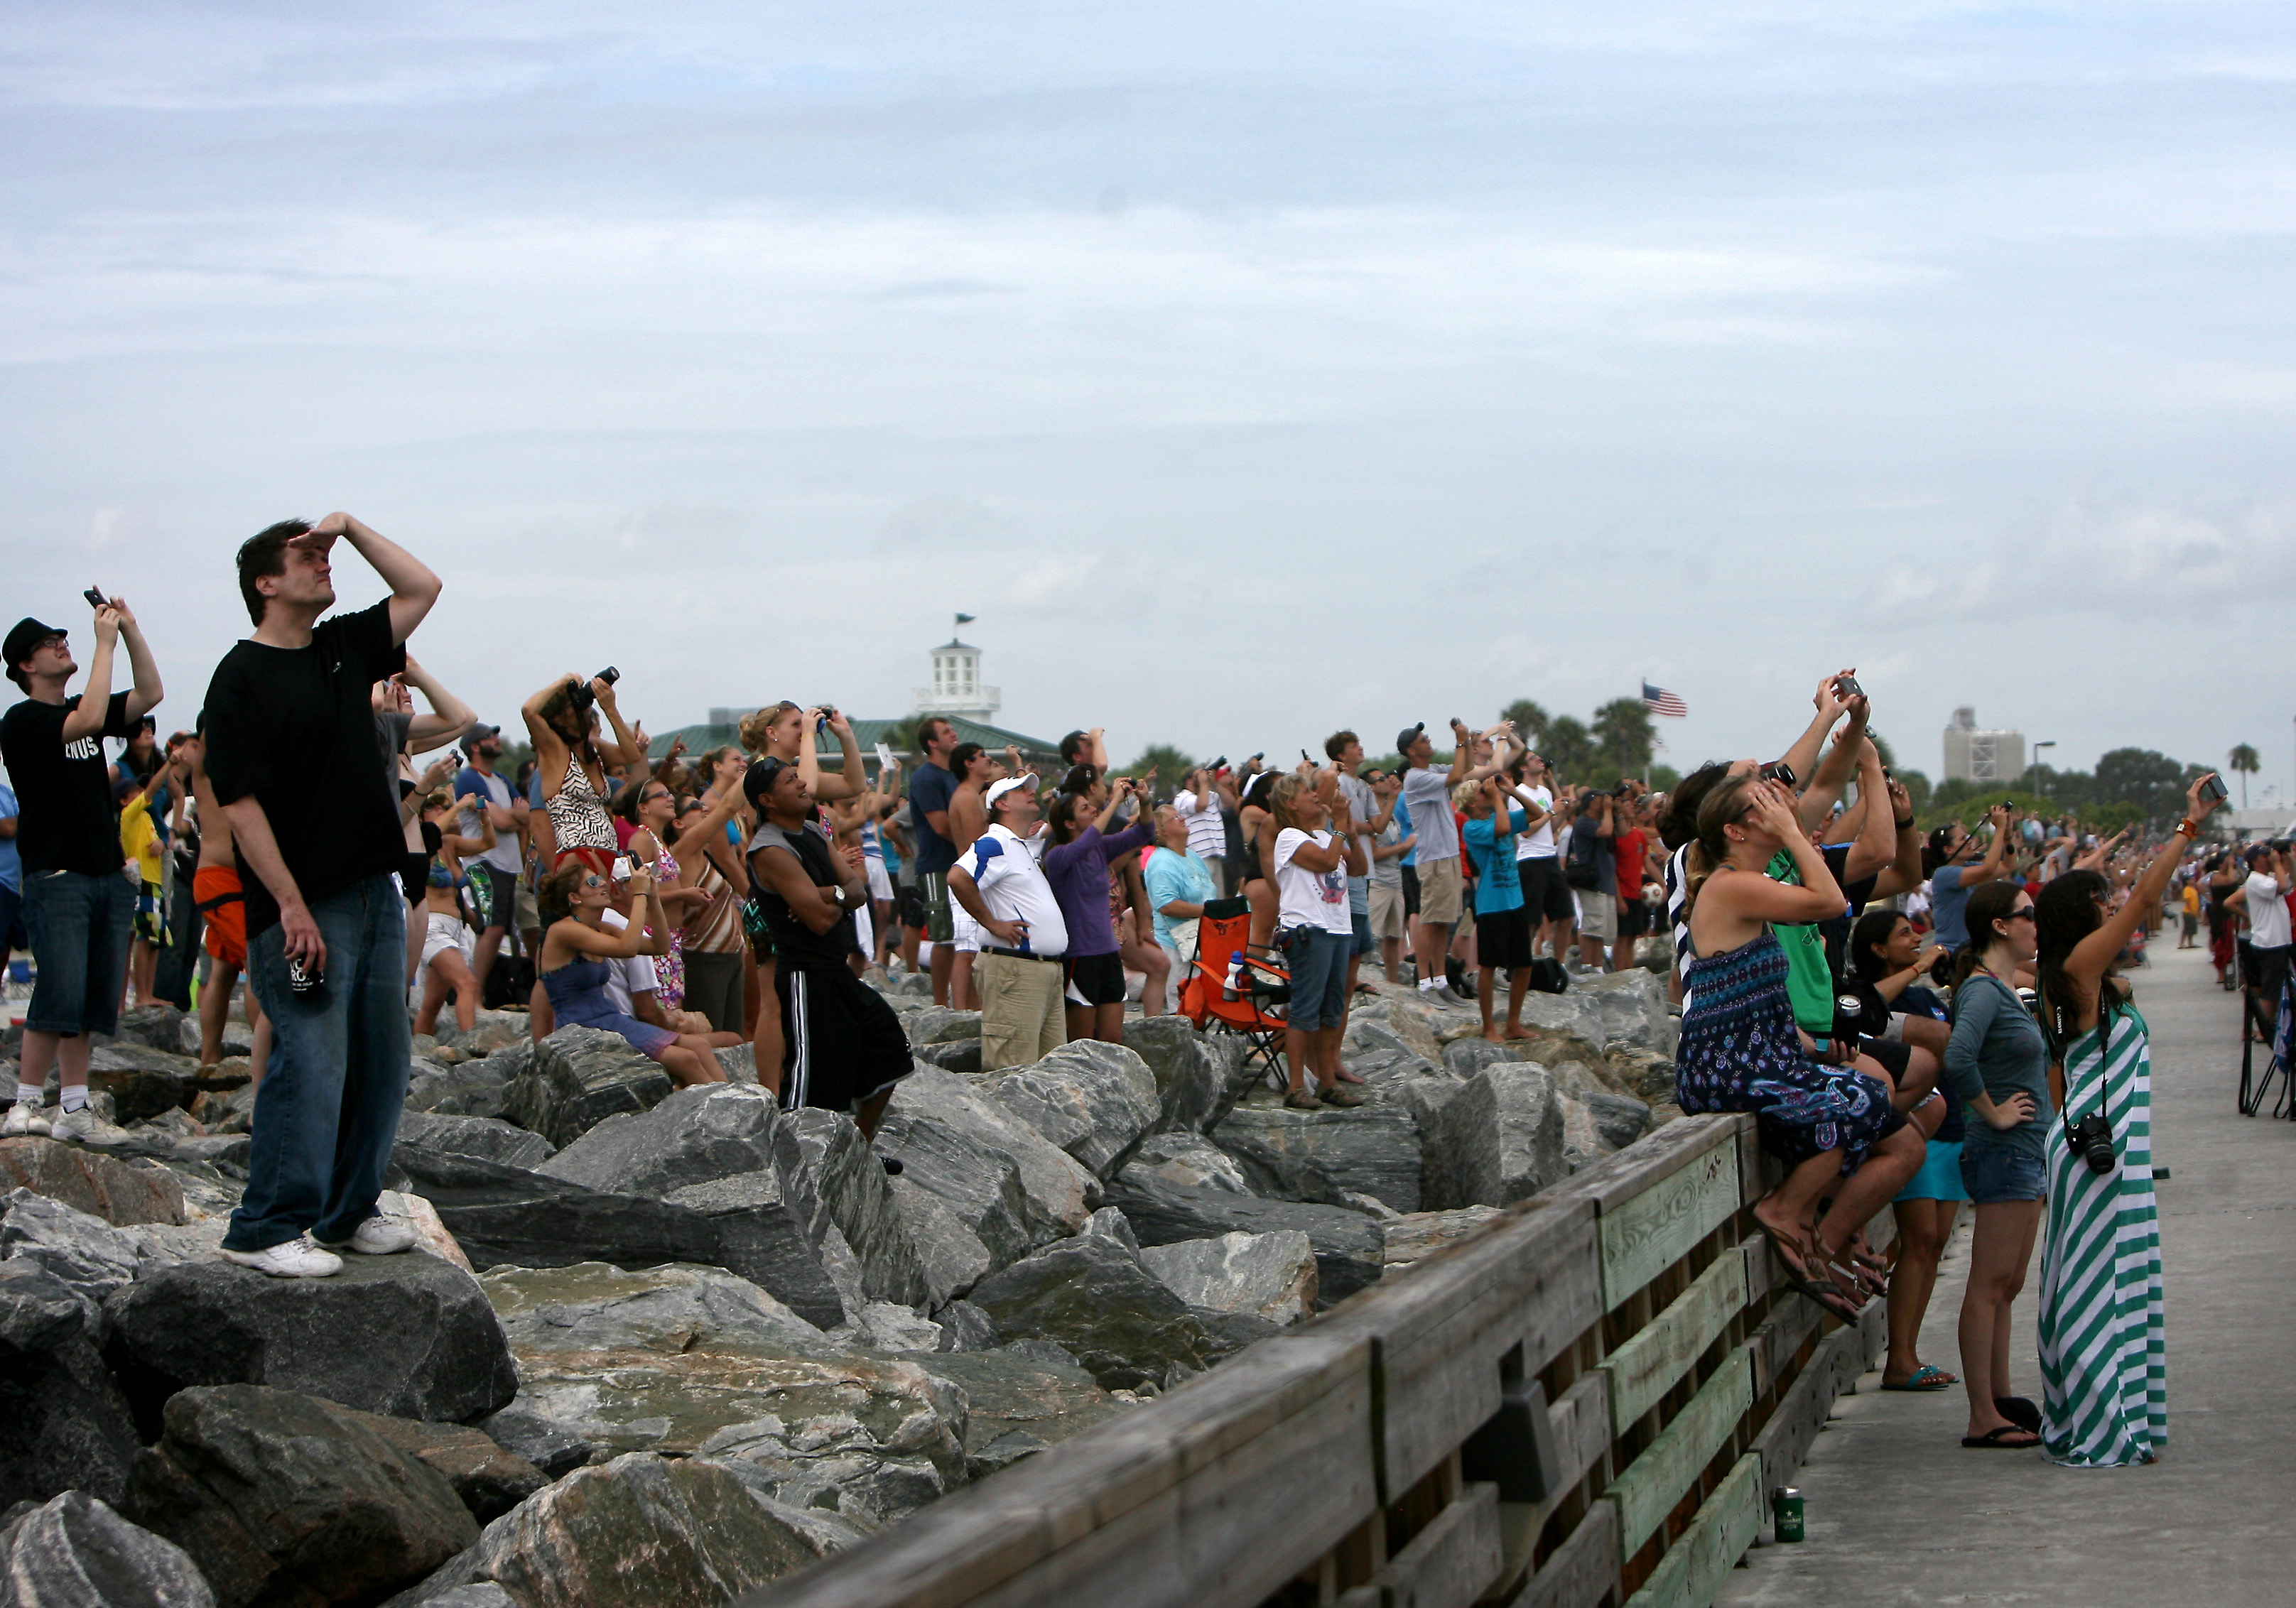 A large crowd watches the launch of the Space Shuttle Atlantis from Jetty Park in Cape Canaveral on Friday, July 8, 2011.